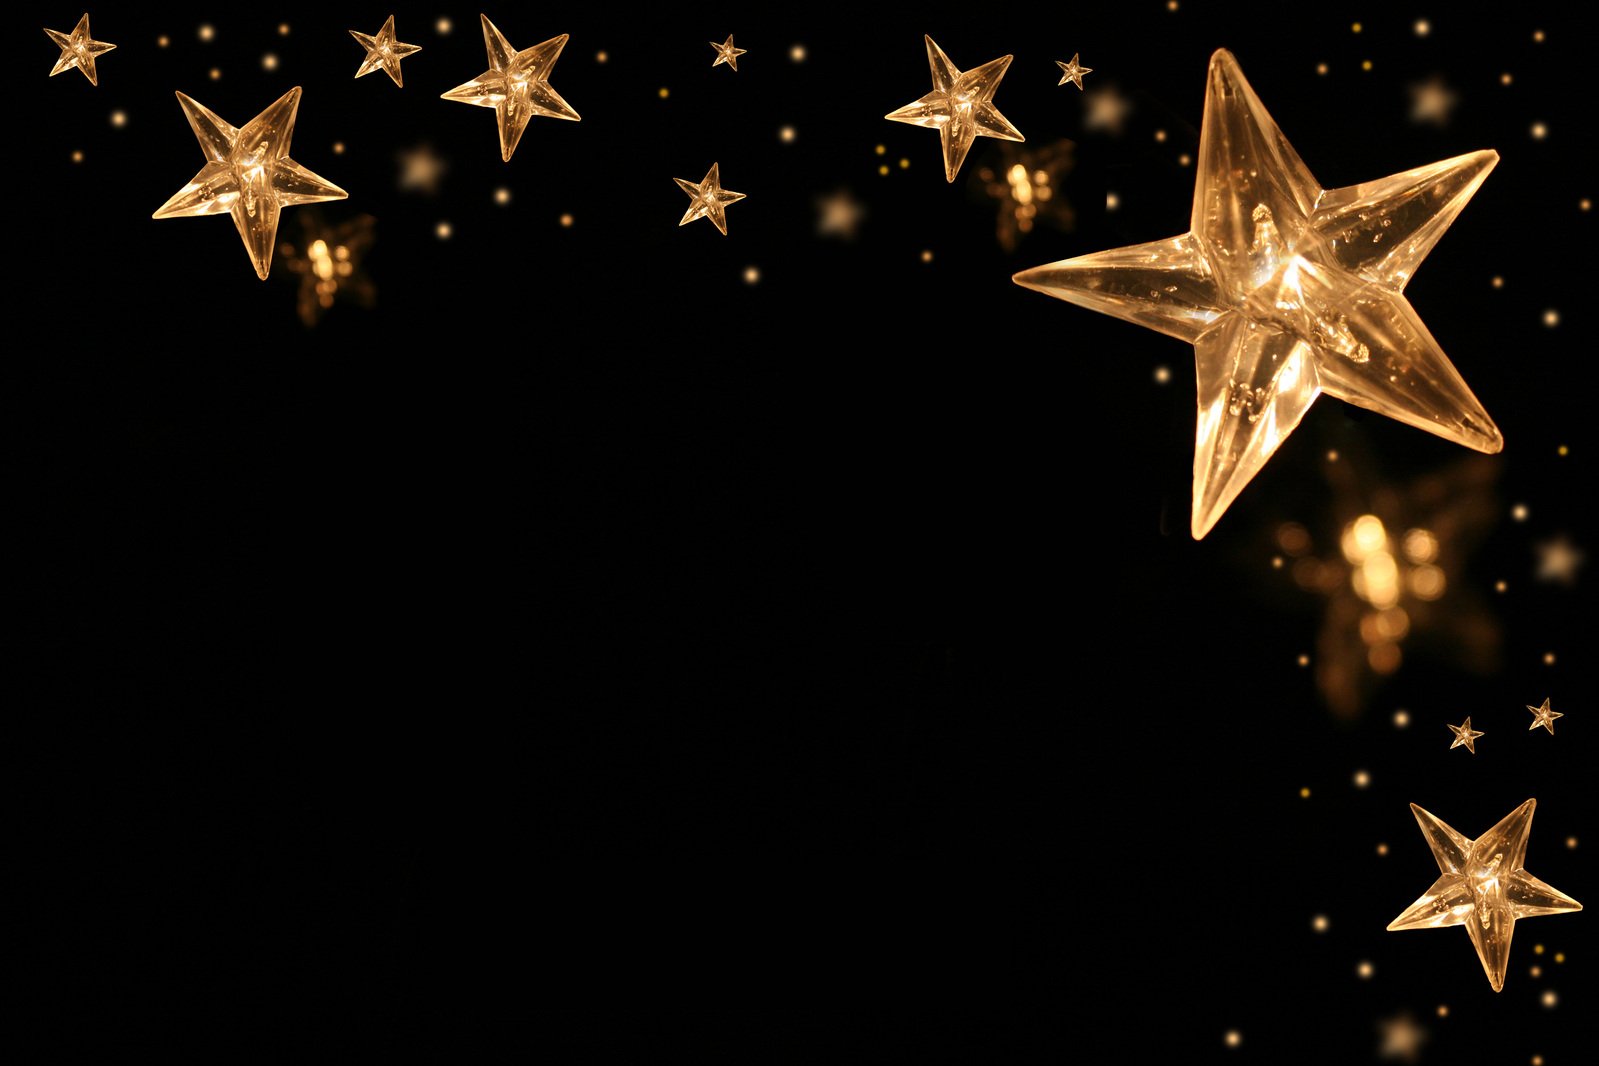 gold stars and stars falling out of the dark background